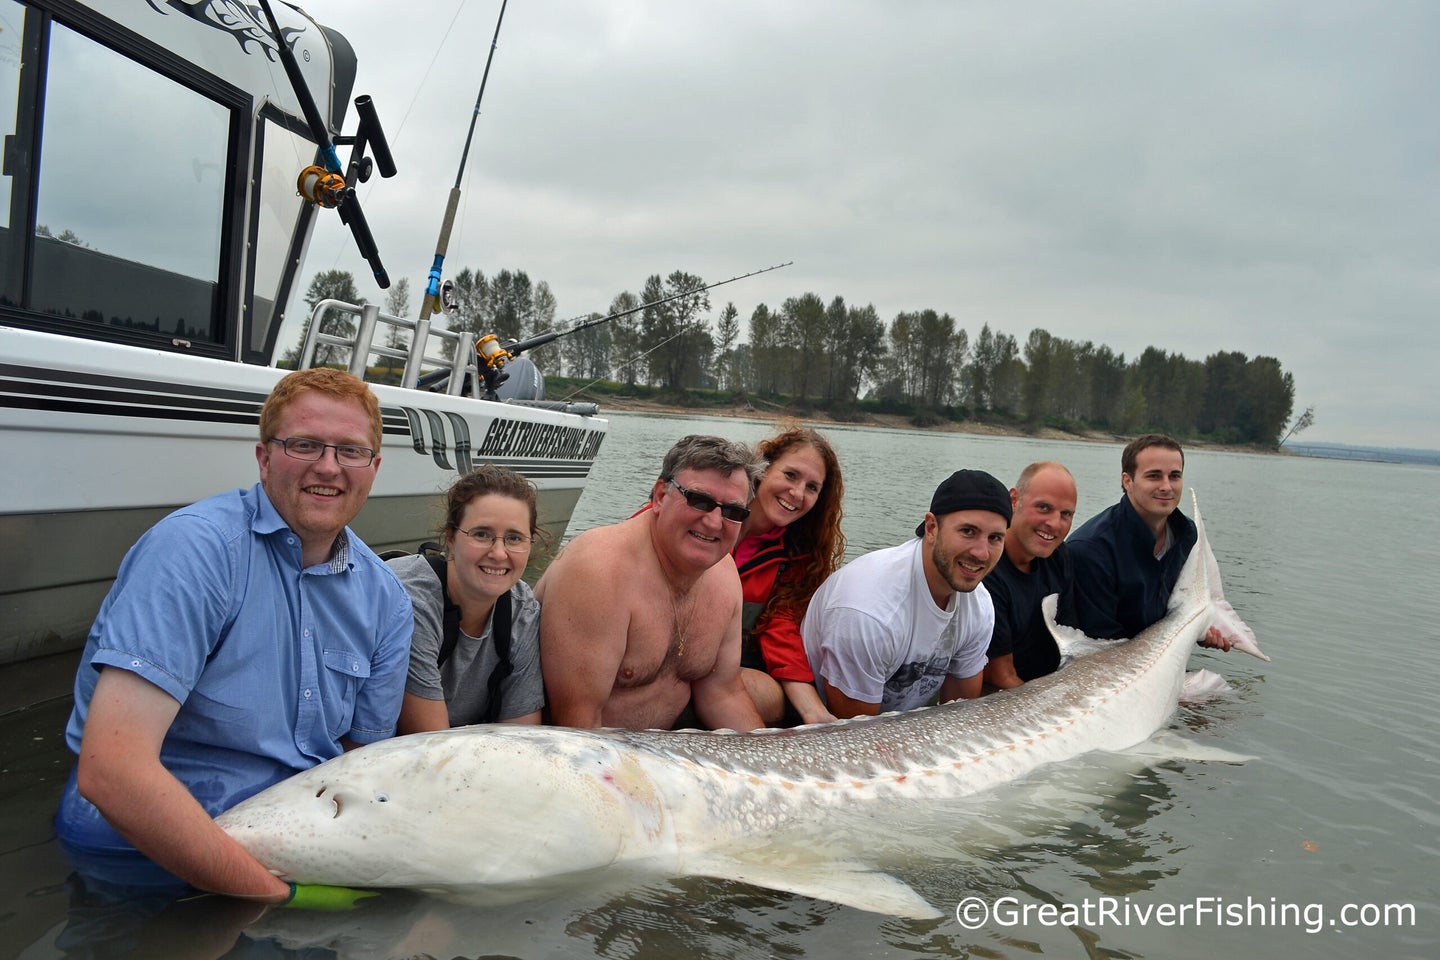 Eight people stand in water while holding and posing with a giant white sturgeon.